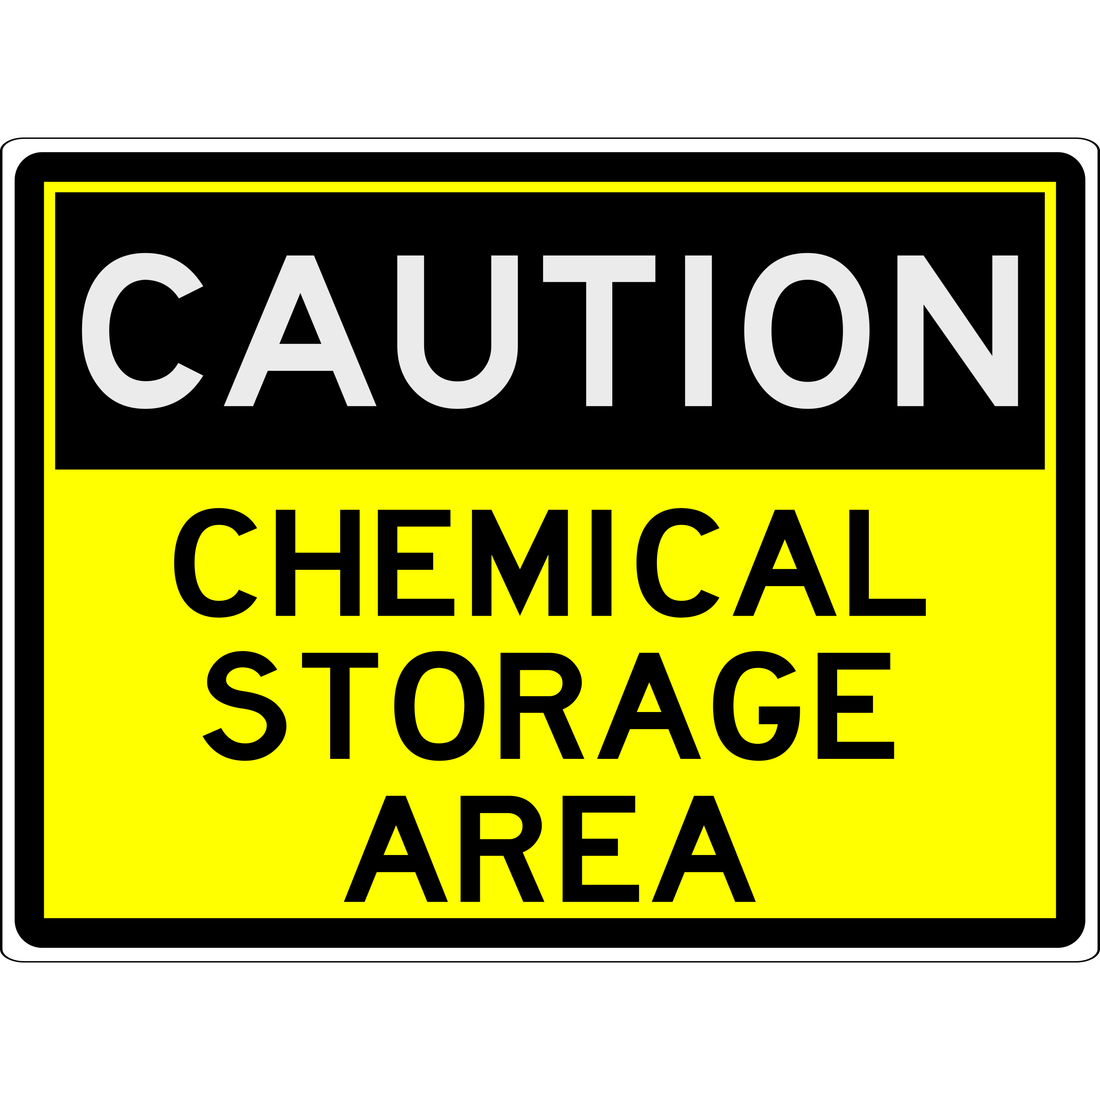 WARNING - CAUTION CHEMICAL STORAGE AREA